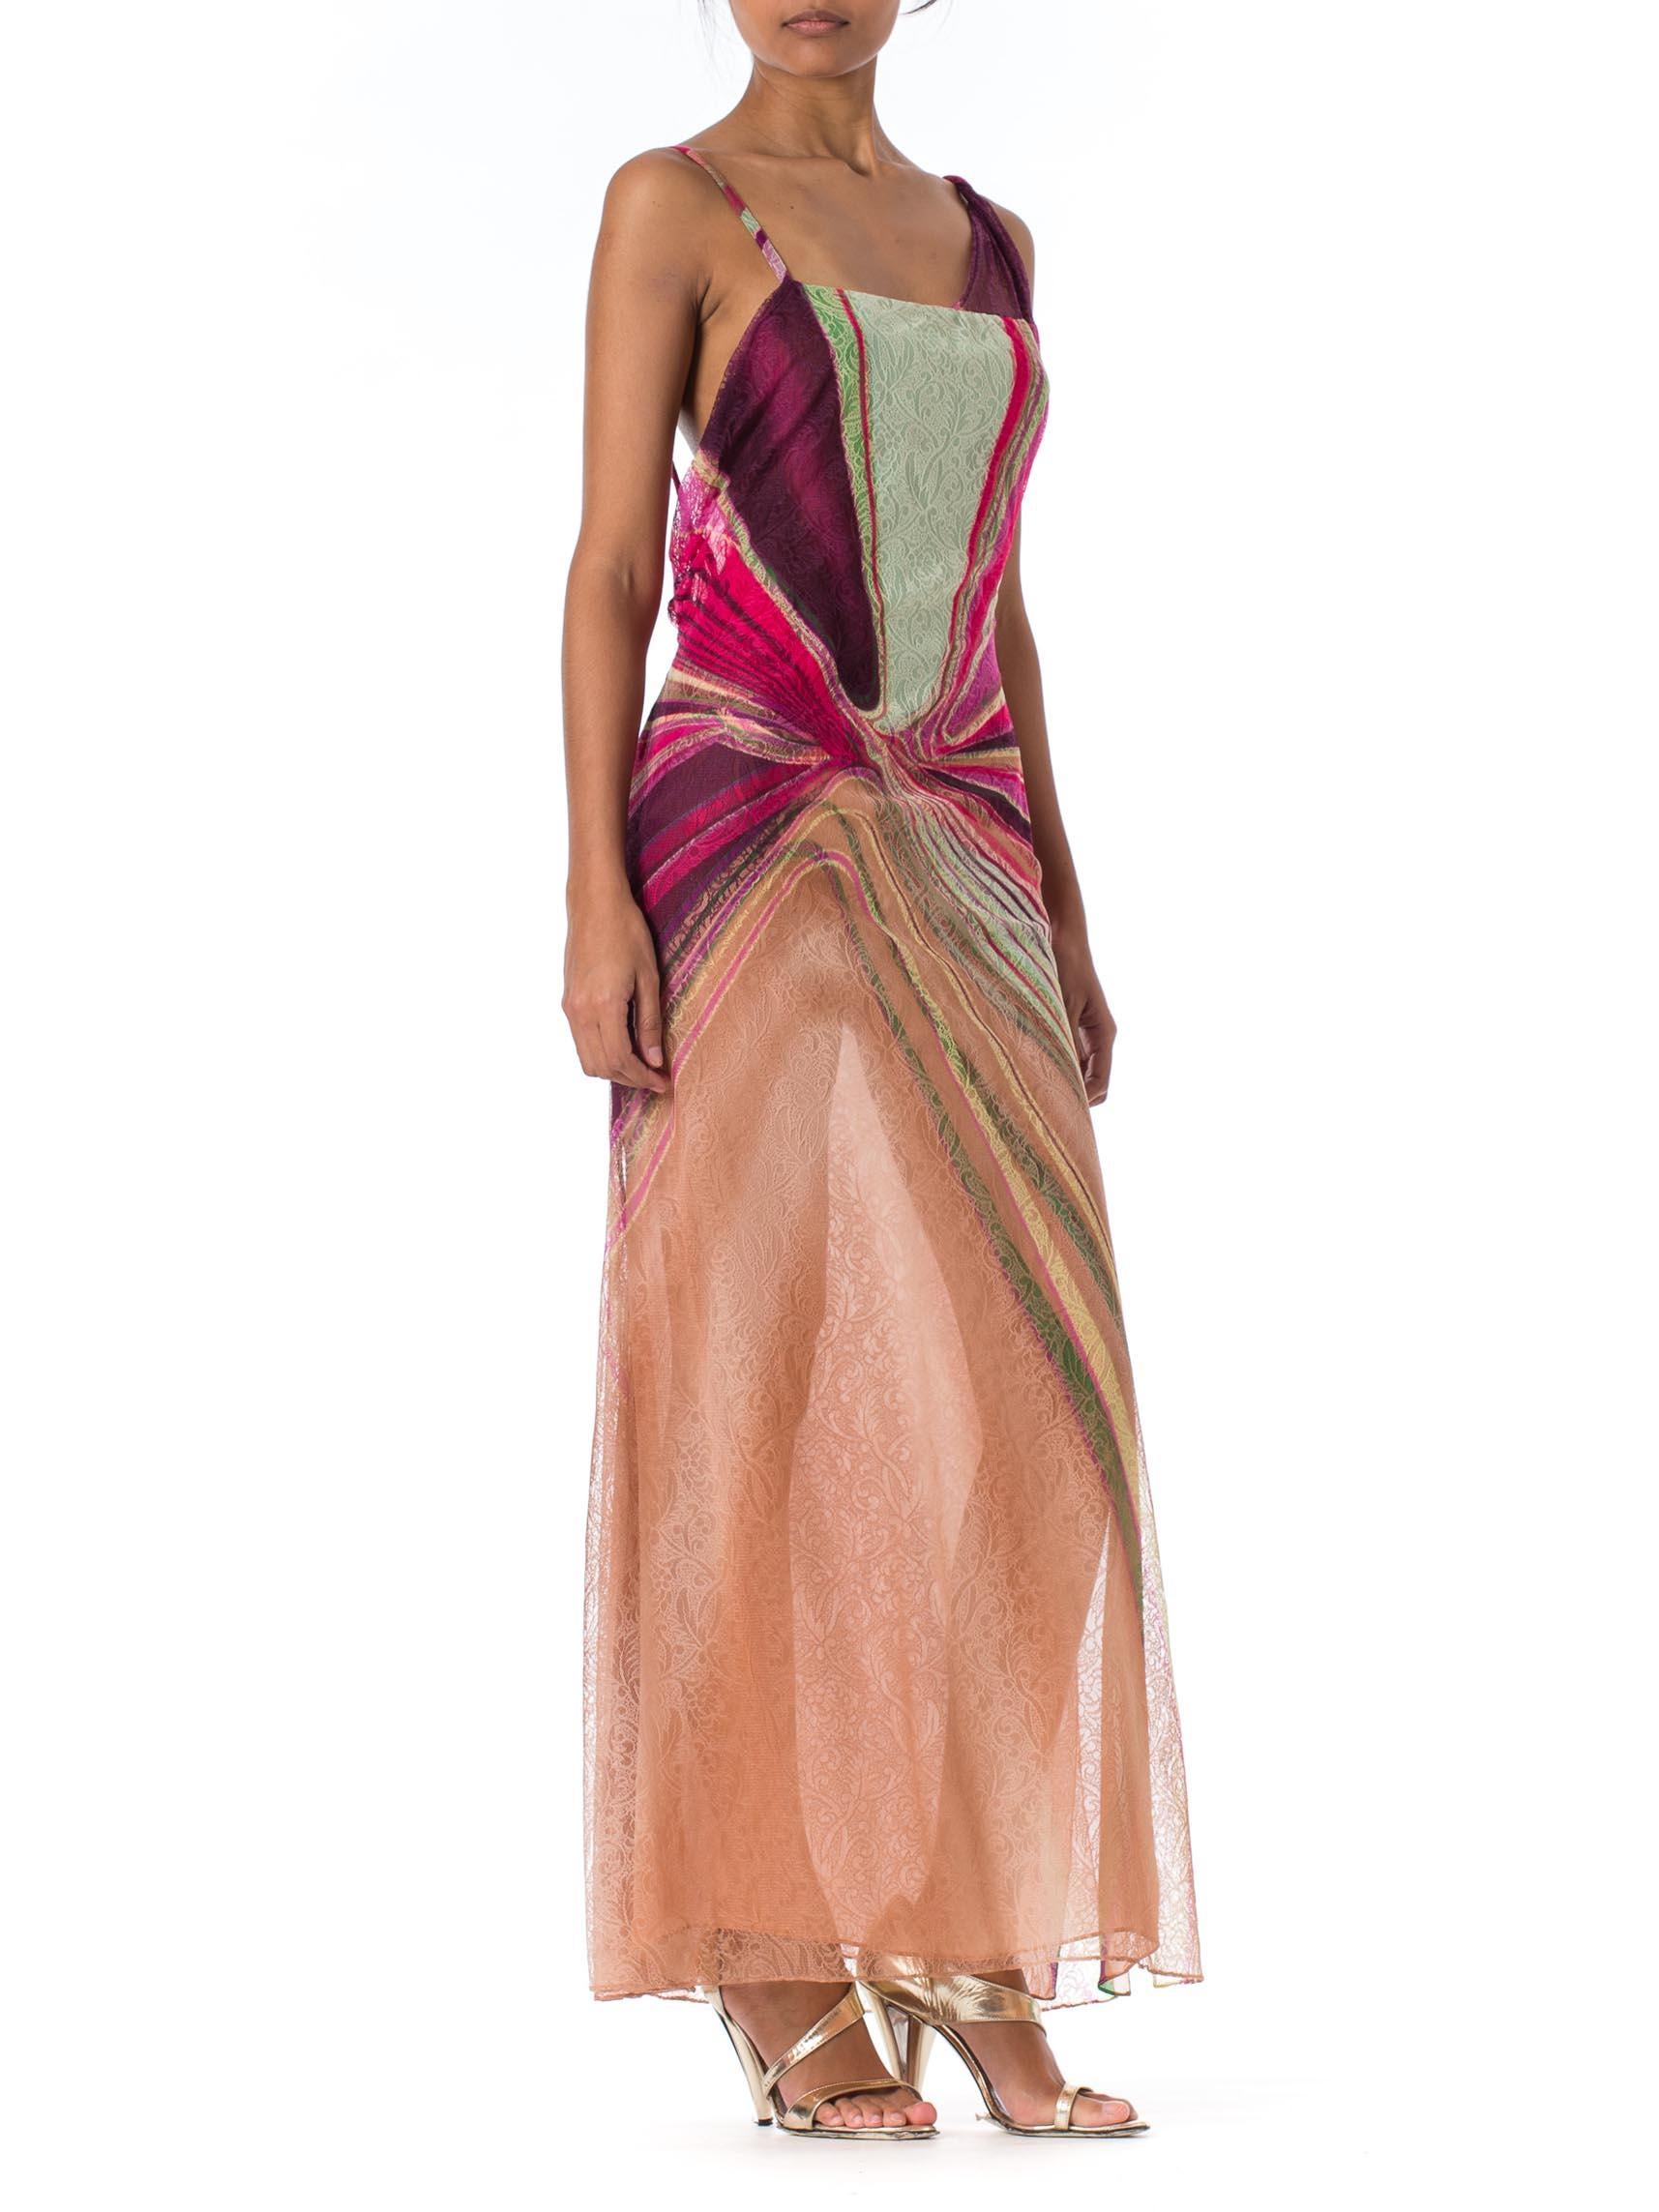 Women's Gianni Versace Couture Runway Editorial Backless Sheer Chiffon and Lace Gown